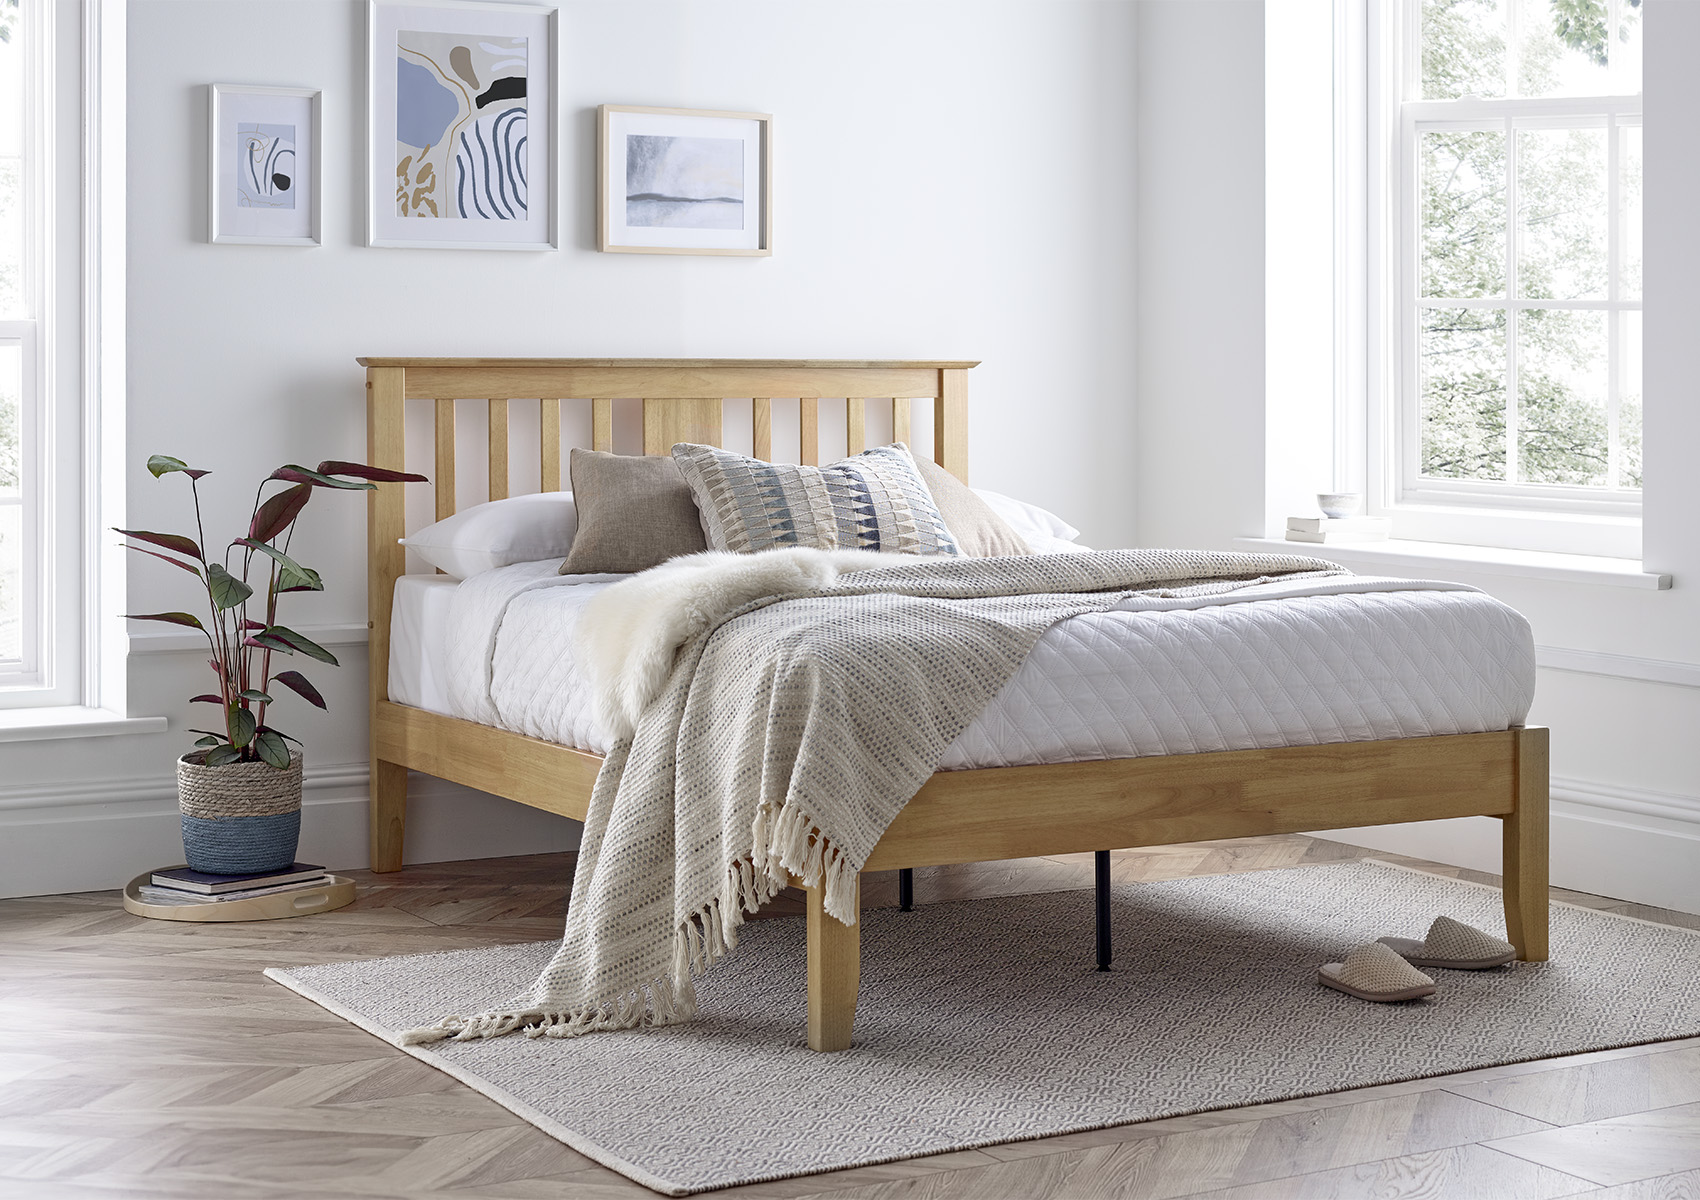 View Malmo Light Wood Wooden Double Bed Time4Sleep information